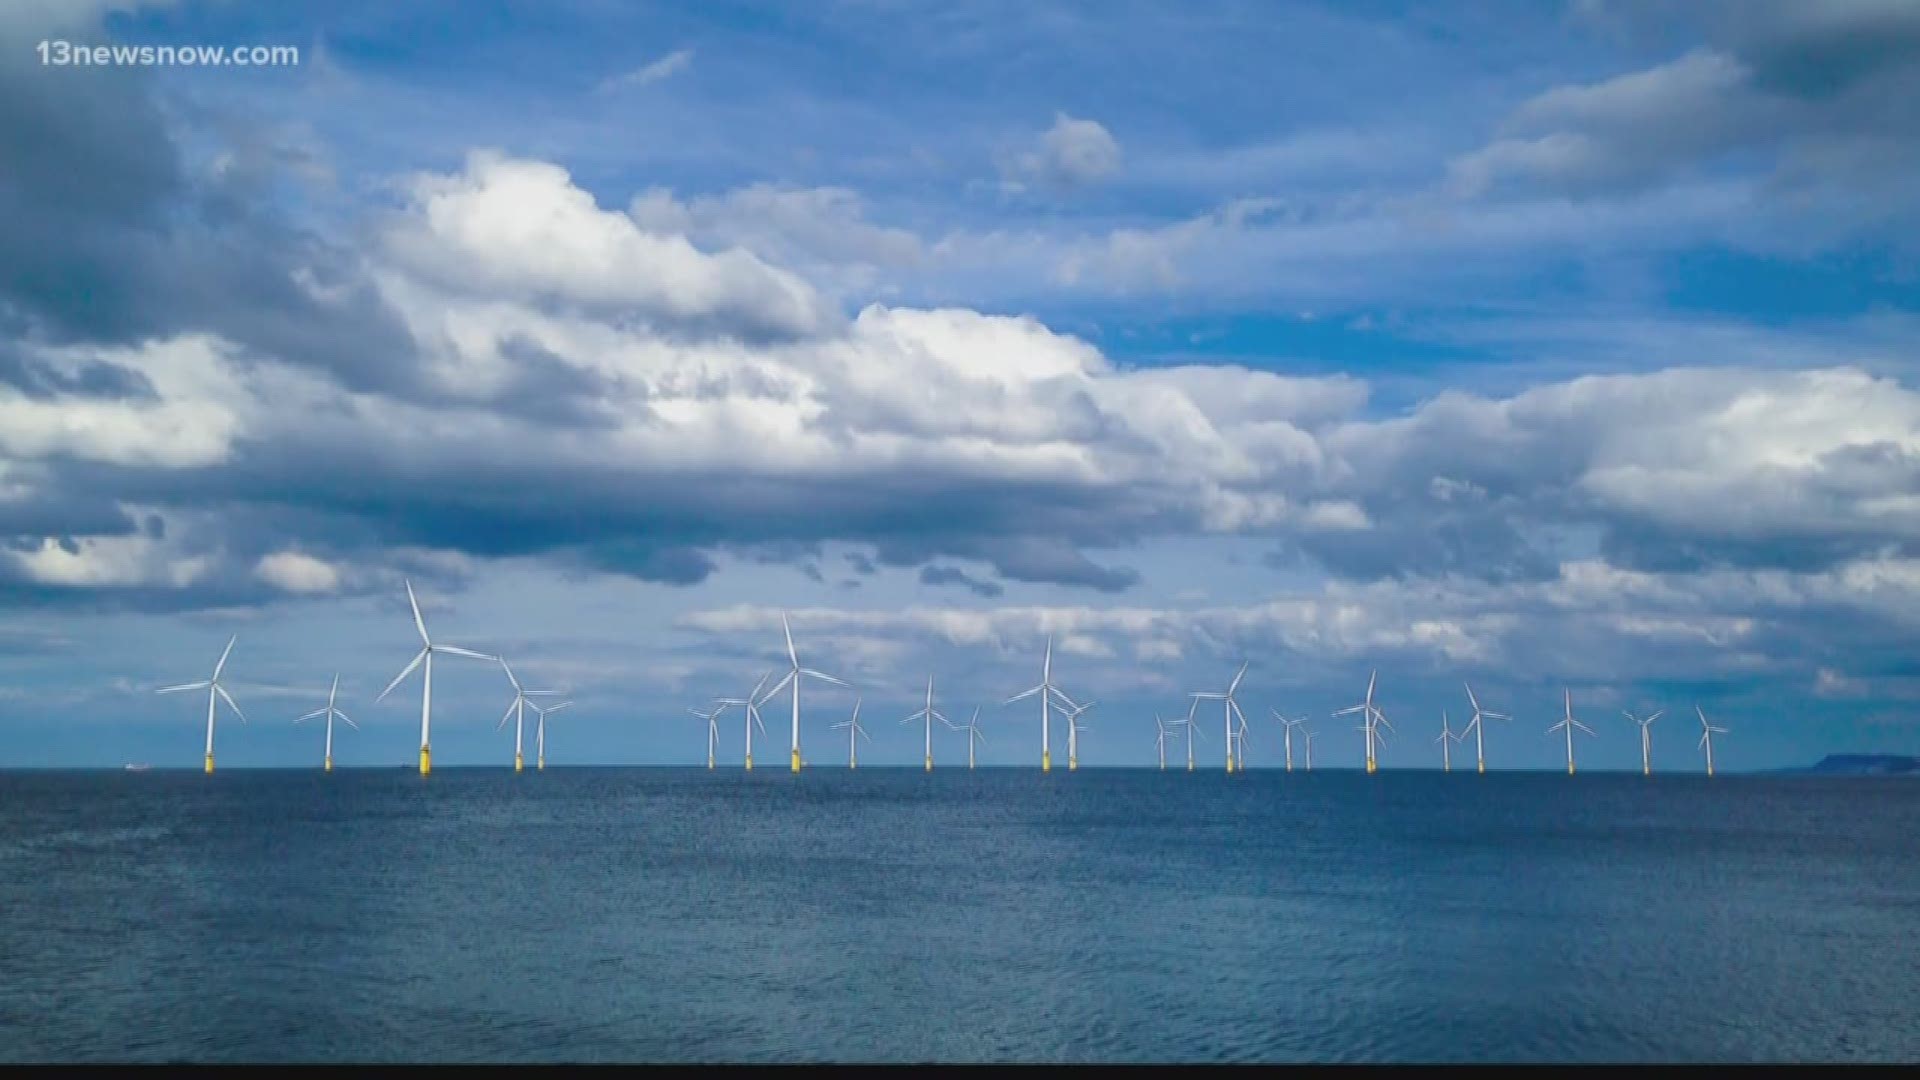 13News Now Ali Weatherton has the new details on the project to build a wind farm off the coast.